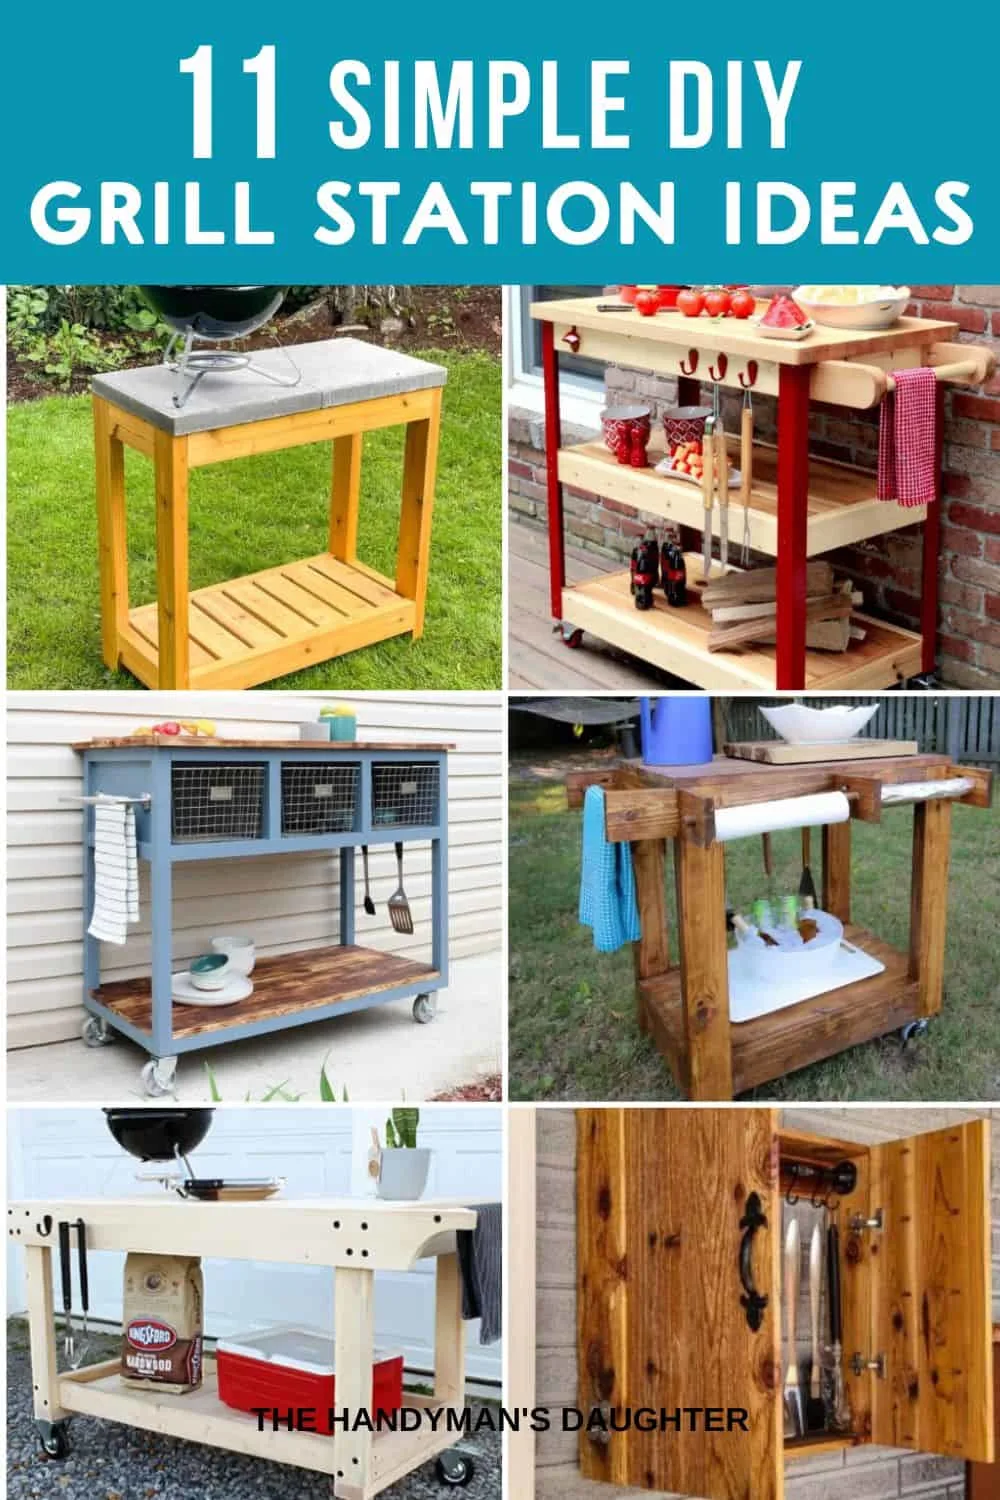 https://www.thehandymansdaughter.com/wp-content/uploads/2022/06/DIY-grill-station-ideas-The-Handymans-Daughter-Pin-2.jpg.webp